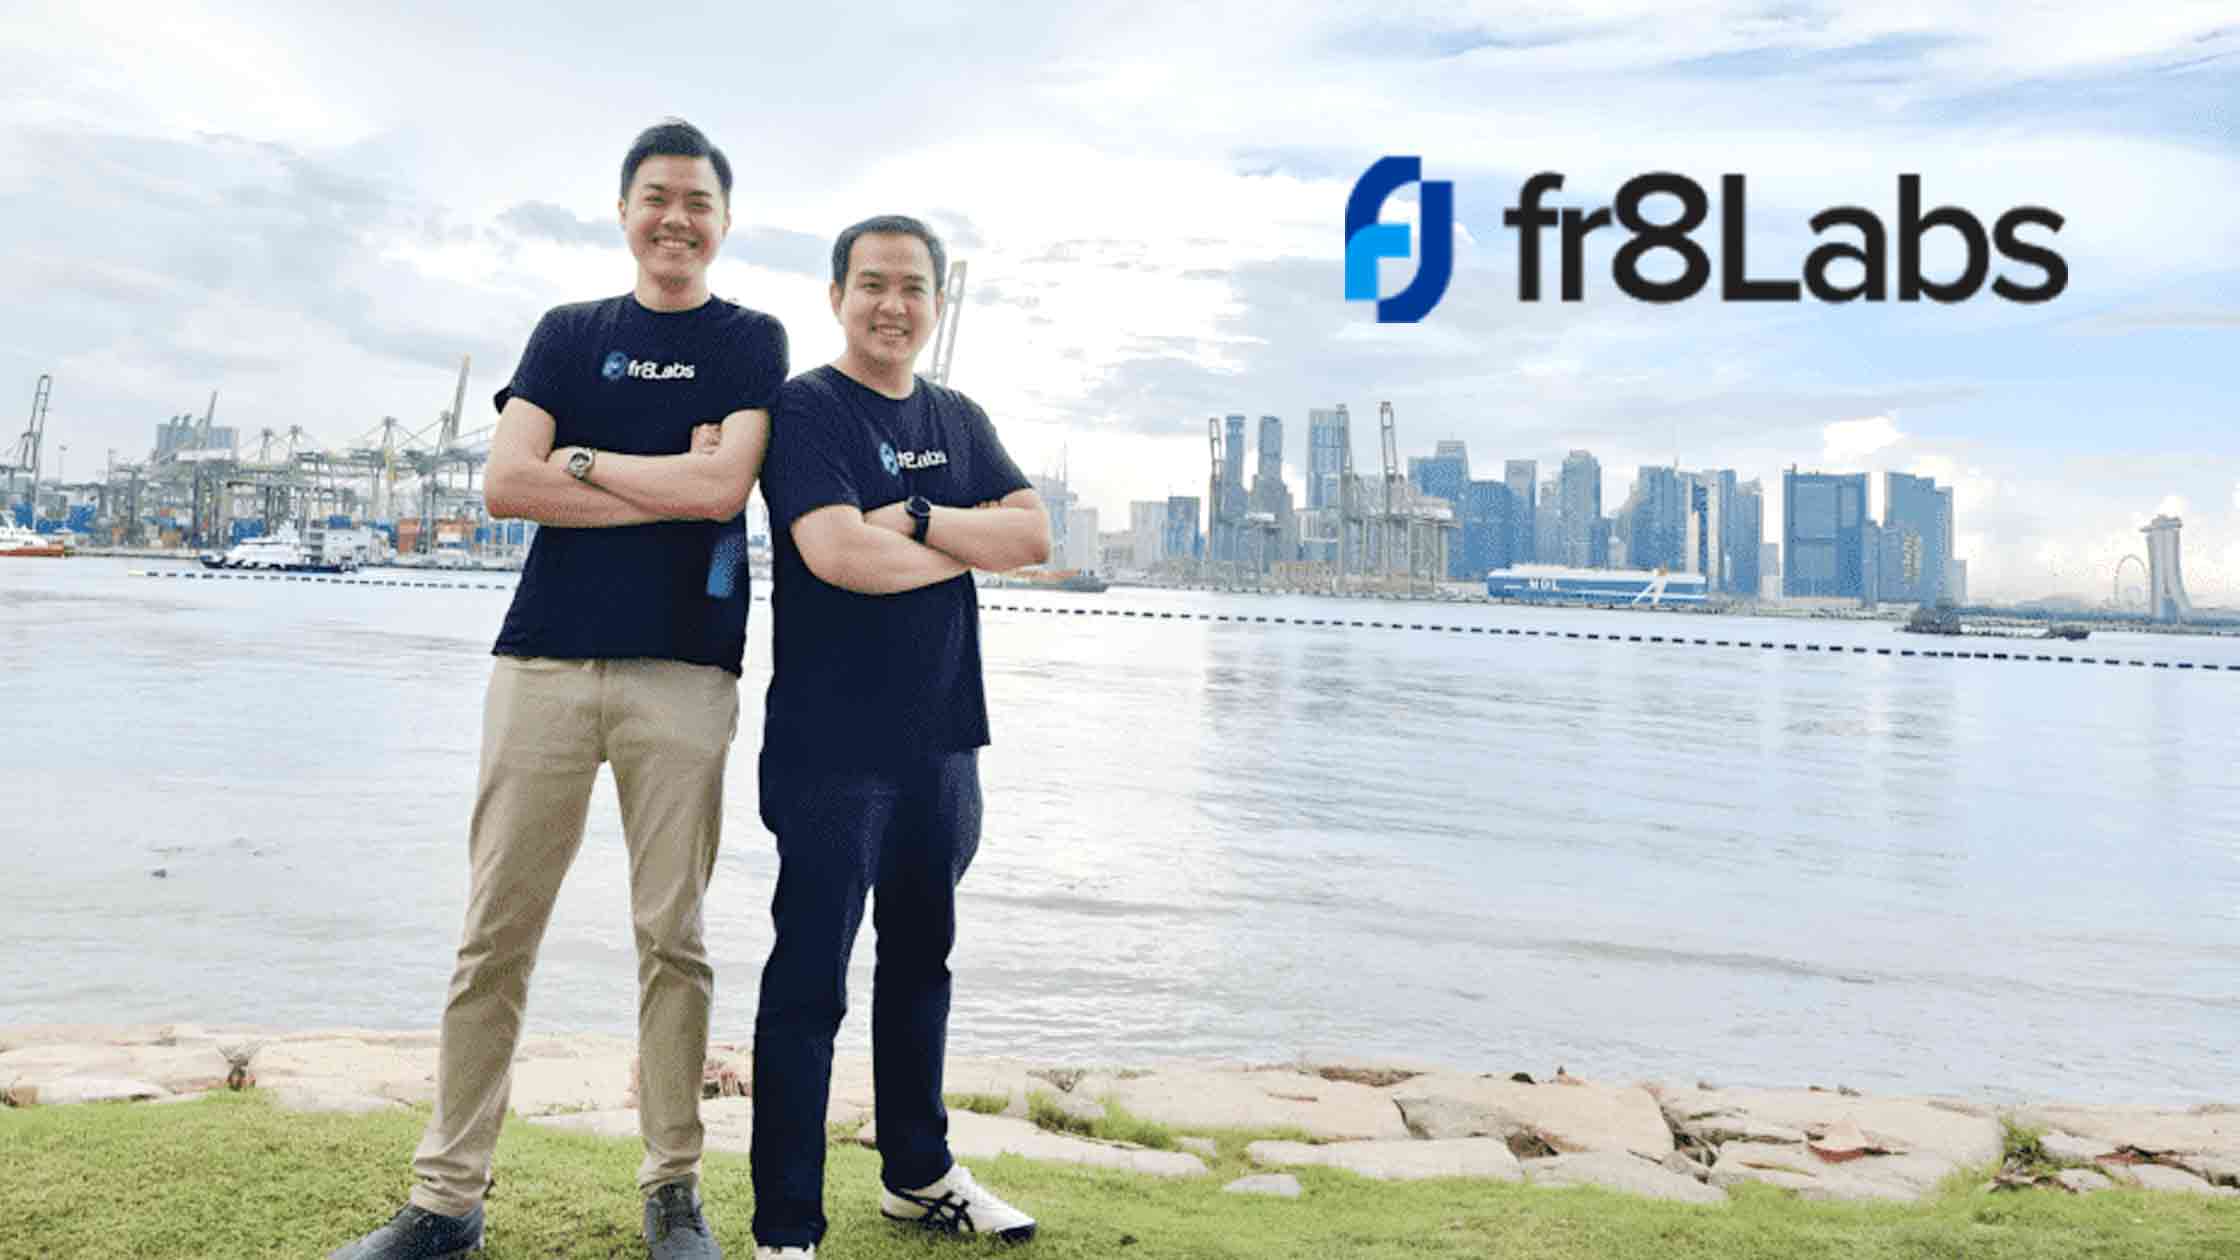 Fr8Labs logistics startup company seed funding